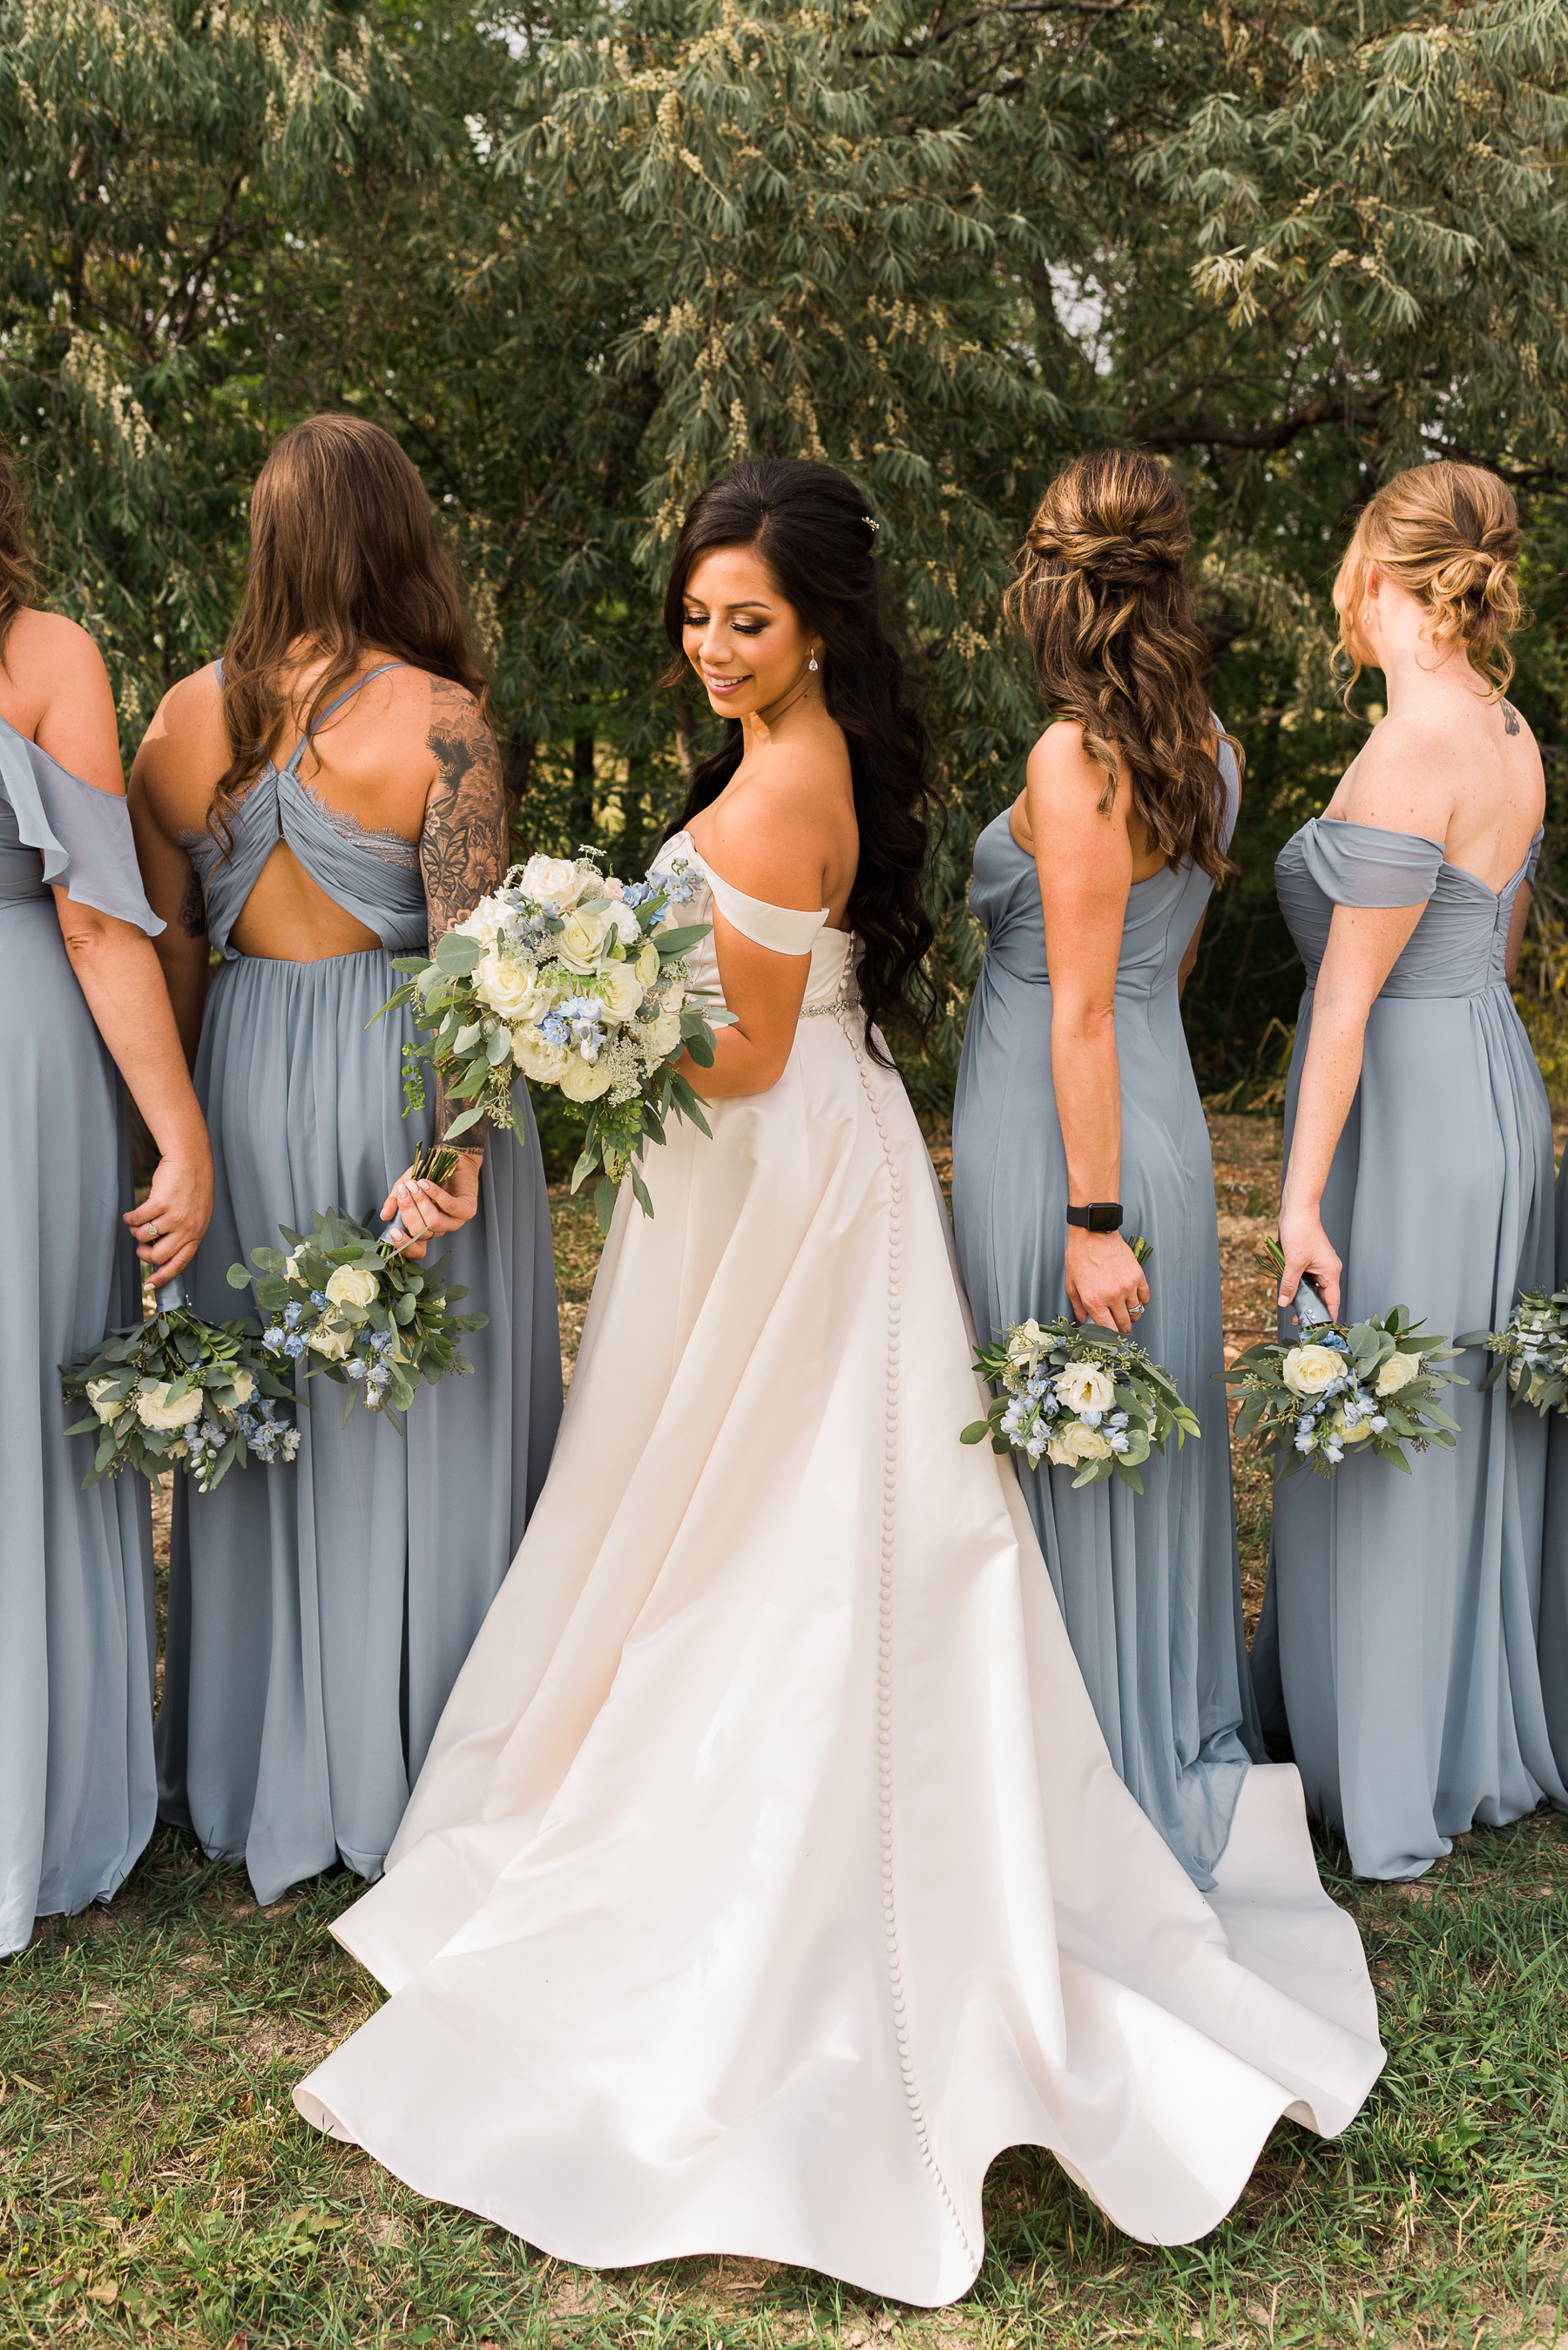 Bridesmaid Photos with Dusty Blue Dresses